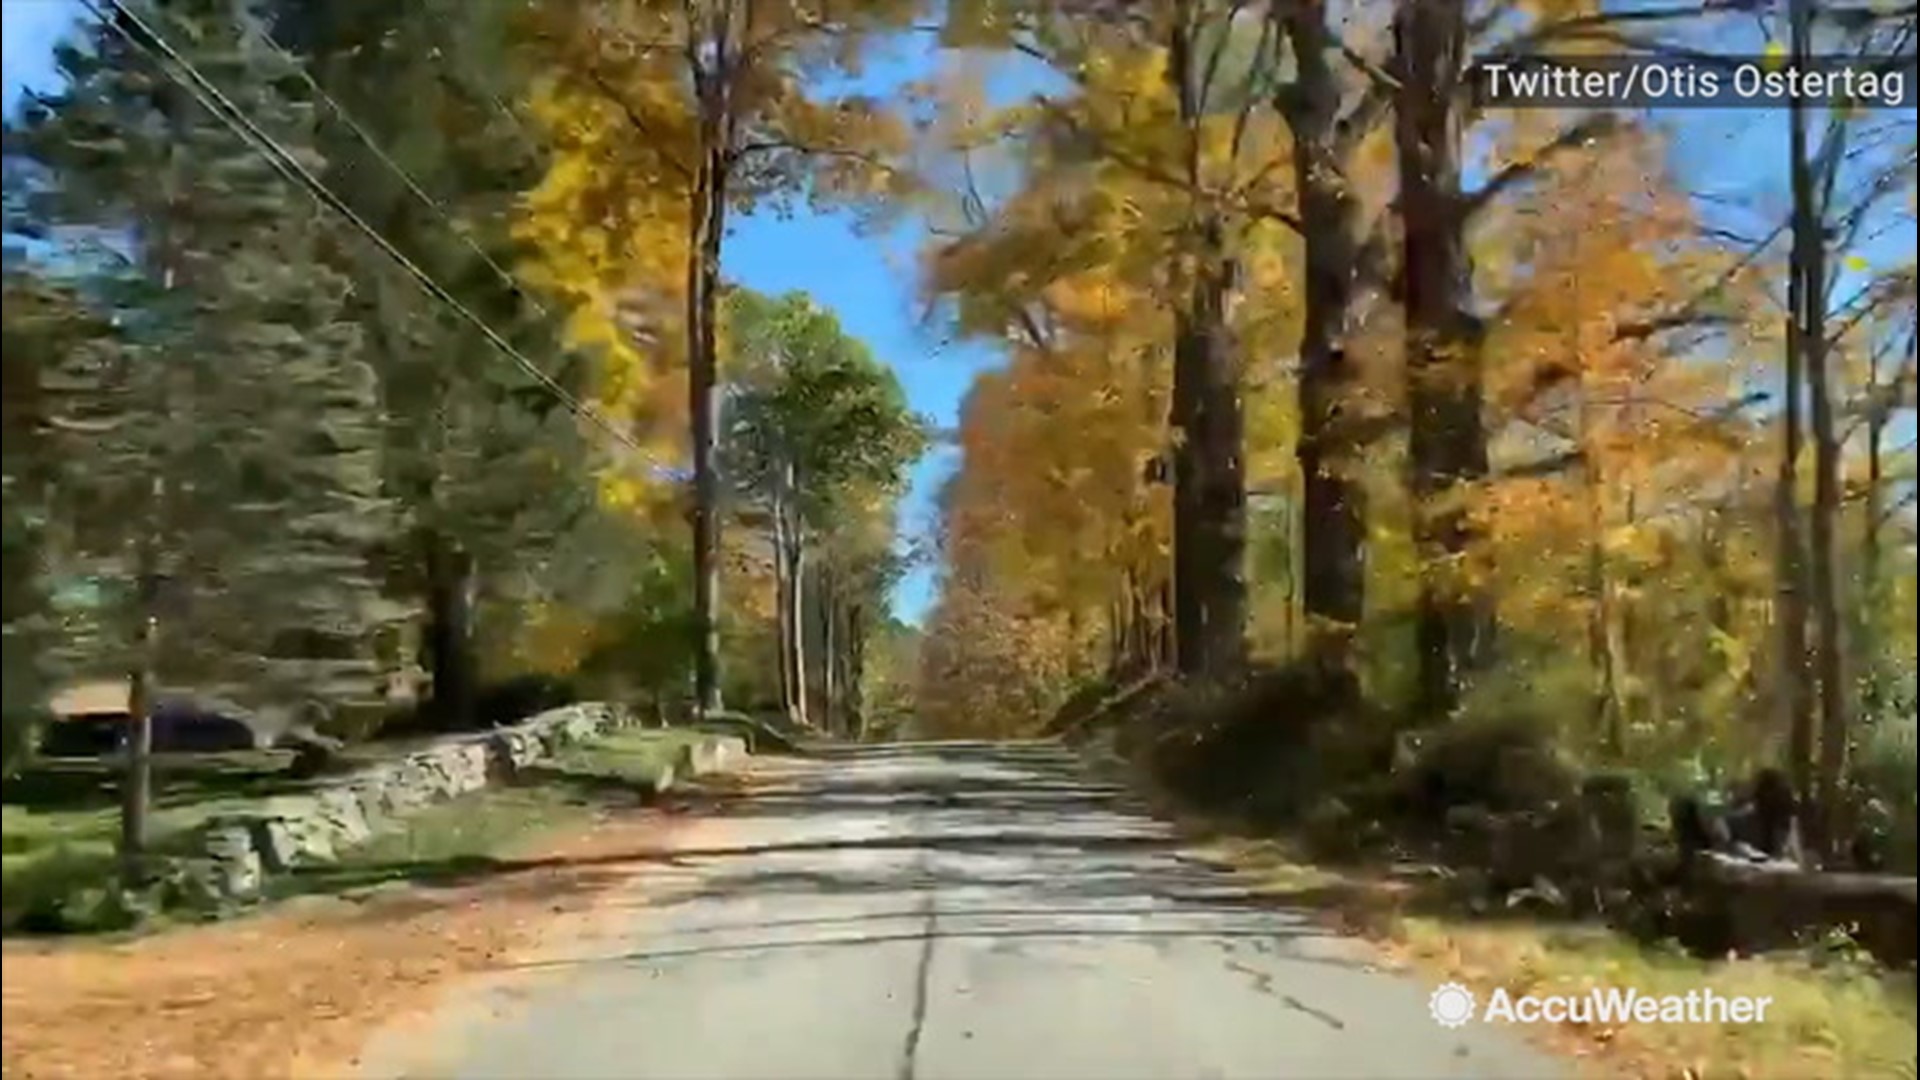 Is there nothing better than a driving through multi-colored trees on a nice fall day? I don't think there is, and I'm sure Otis Ostertag on Twitter would agree. We give him thanks for providing us with this video from East Kingston, New Hampshire, on Oct. 15.